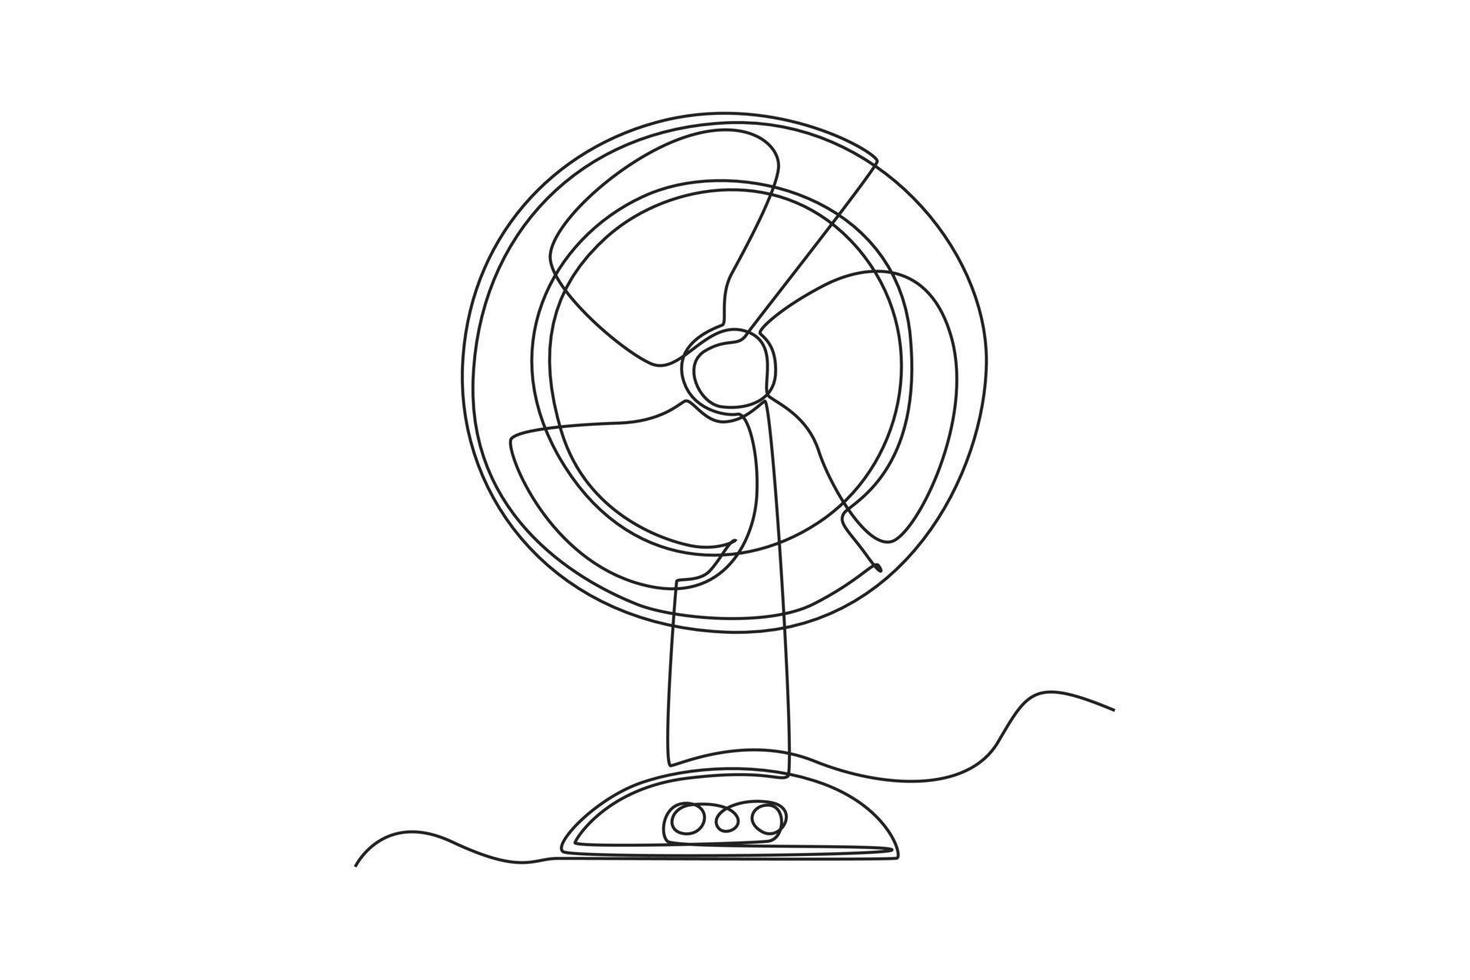 Single one line drawing standing electric fan. Electricity home appliance concept. Continuous line draw design graphic vector illustration.